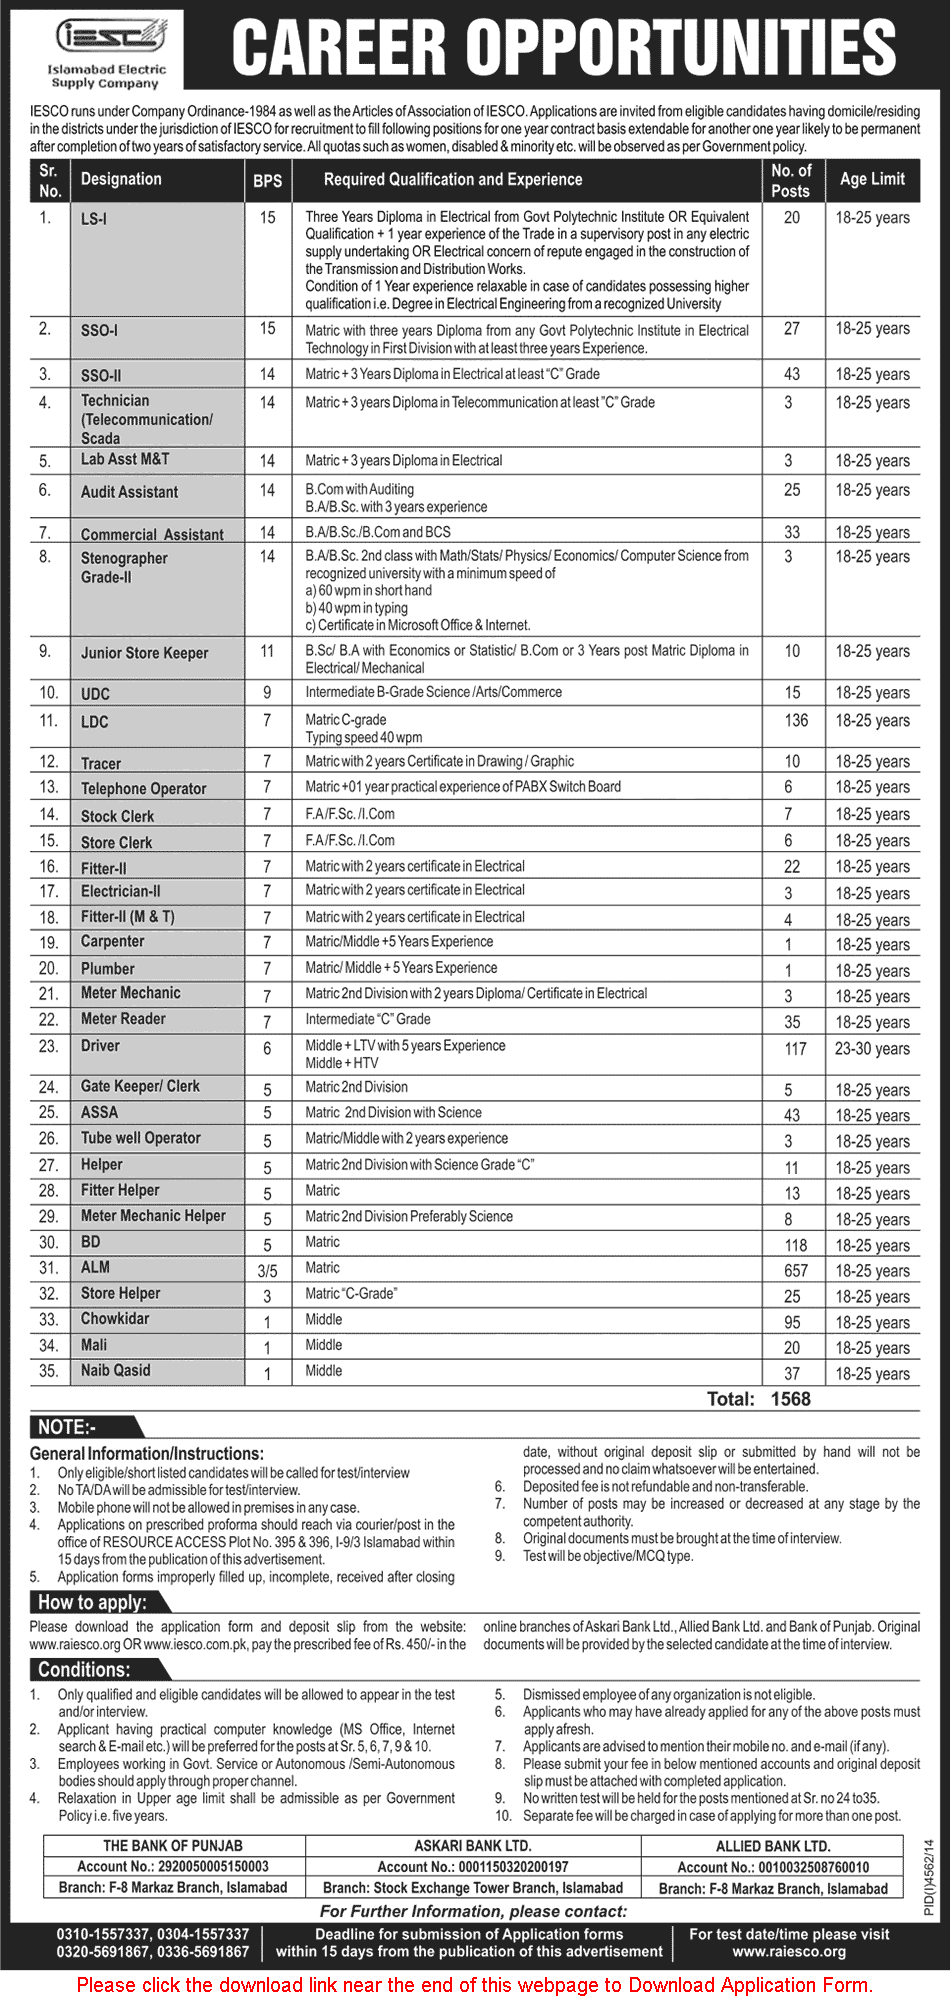 IESCO Jobs 2015 March Application Form Download WAPDA Islamabad BPS-1 to BPS-15 Latest